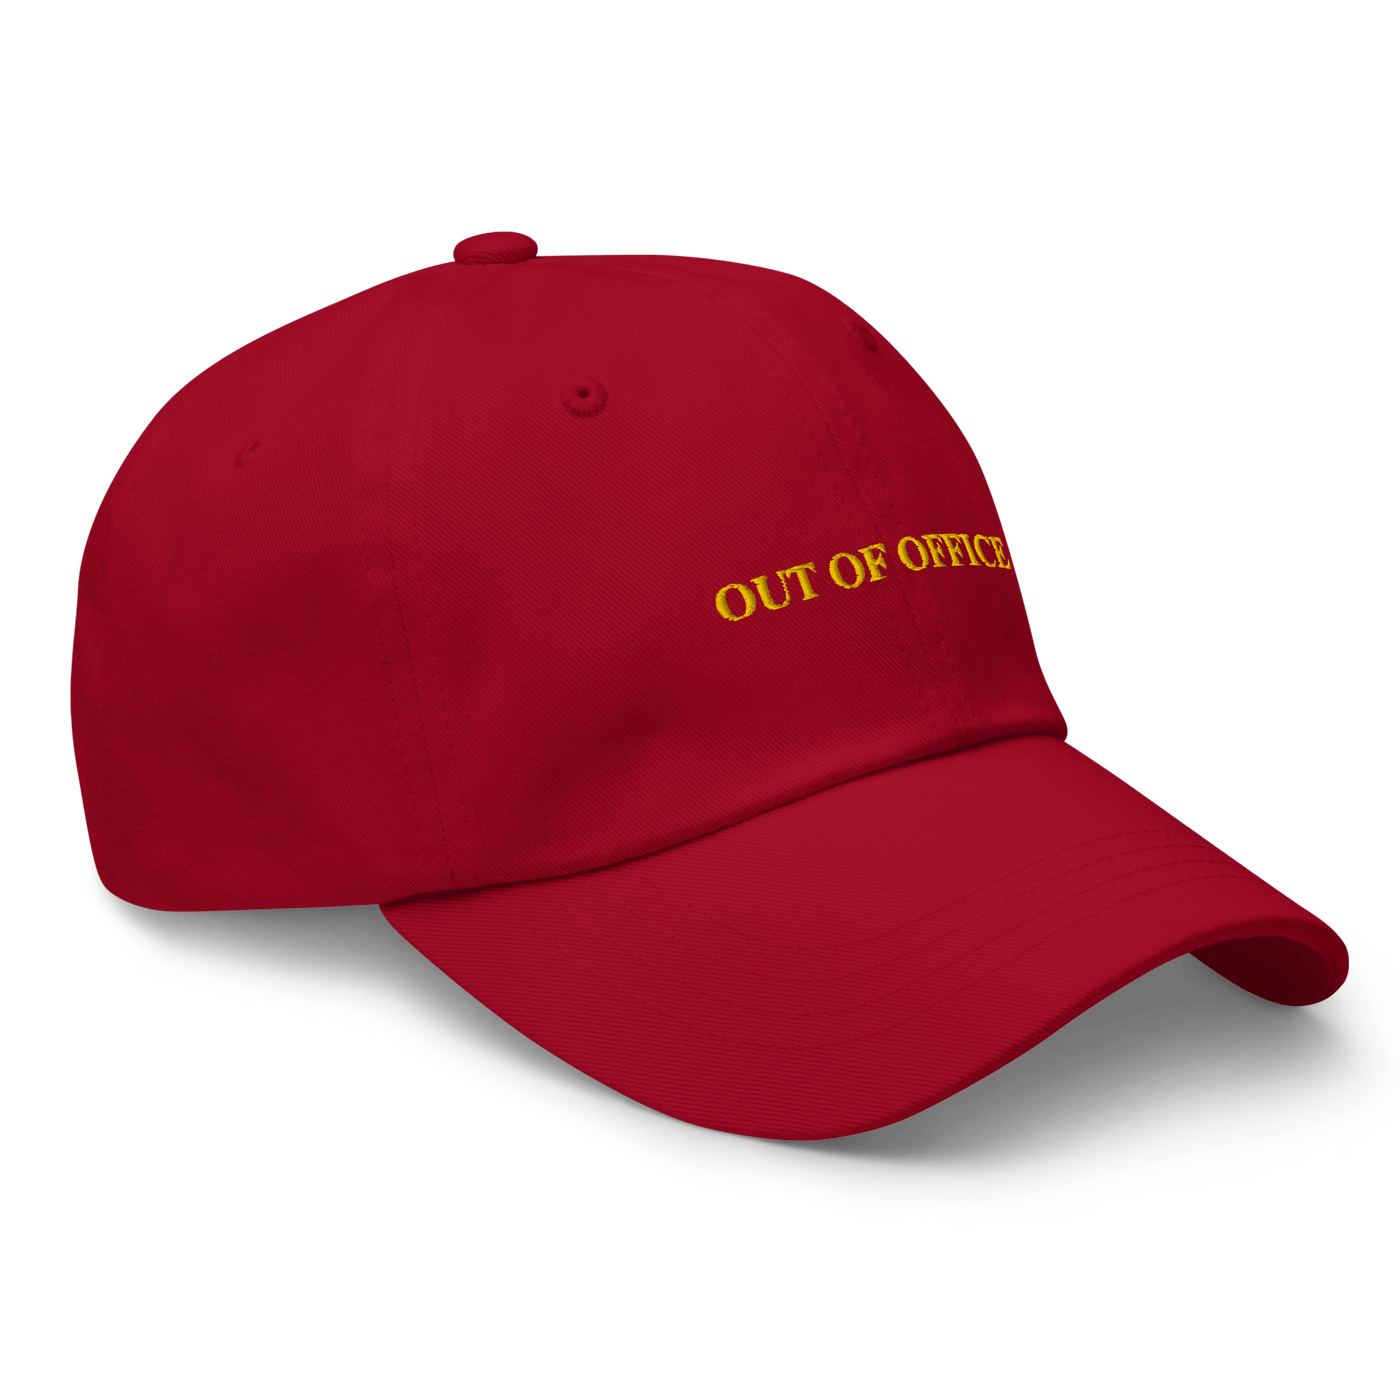 OUT OF OFFICE Dad hat - Cranberry - - Just Another Cap Store